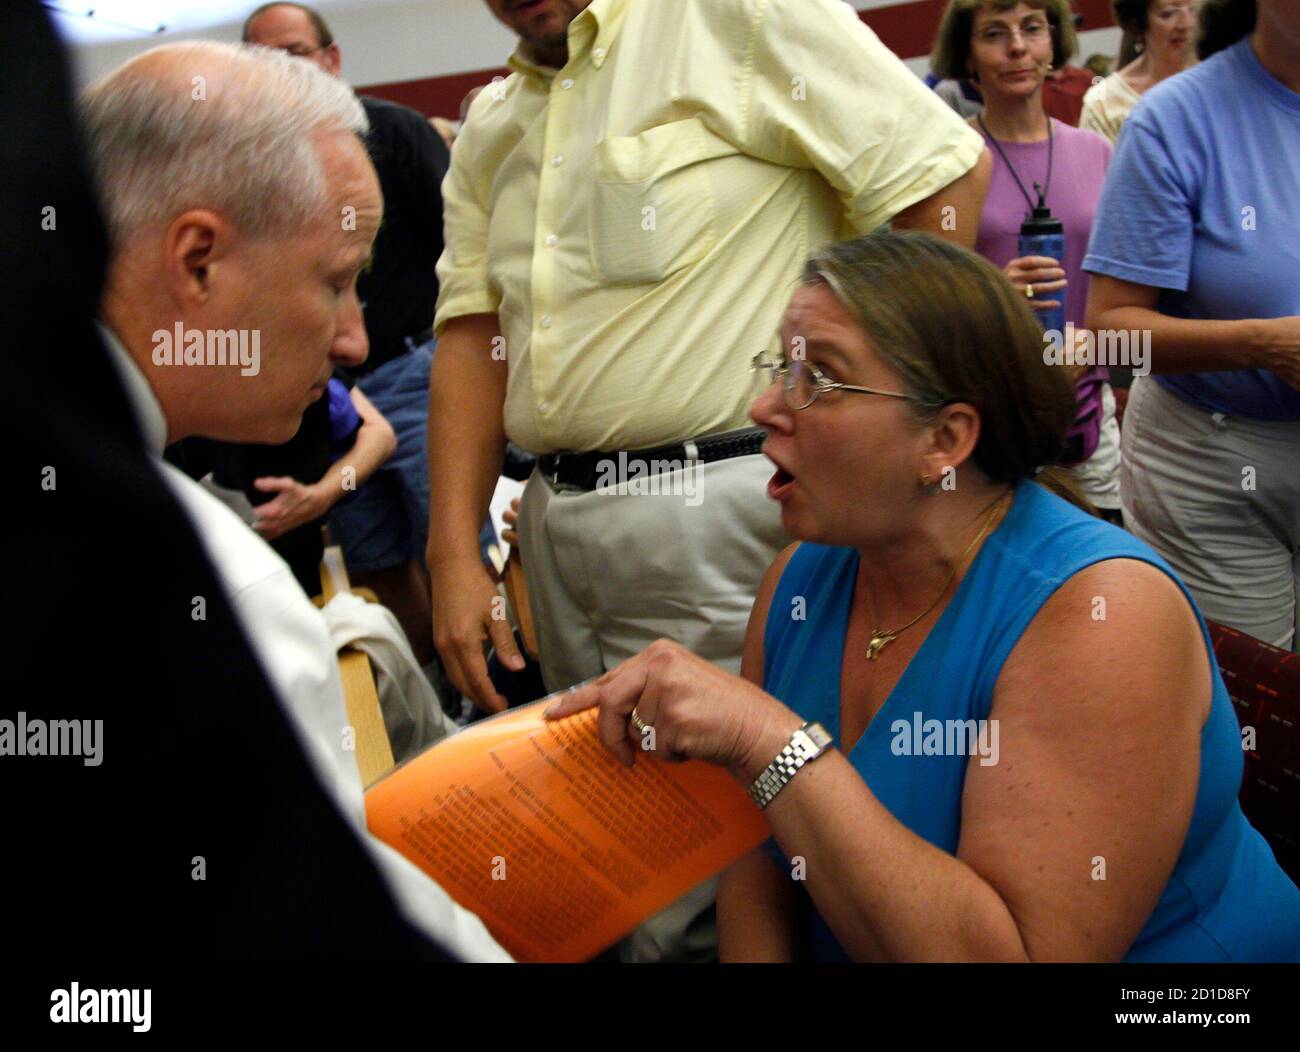 Diane Turek (R) yells at Rep. Mike Coffman (R-CO) at a town hall meeting on healthcare reform hosted by Coffman in Littleton, Colorado August 12, 2009. REUTERS/Rick Wilking (UNITED STATES POLITICS HEALTH) Stock Photo